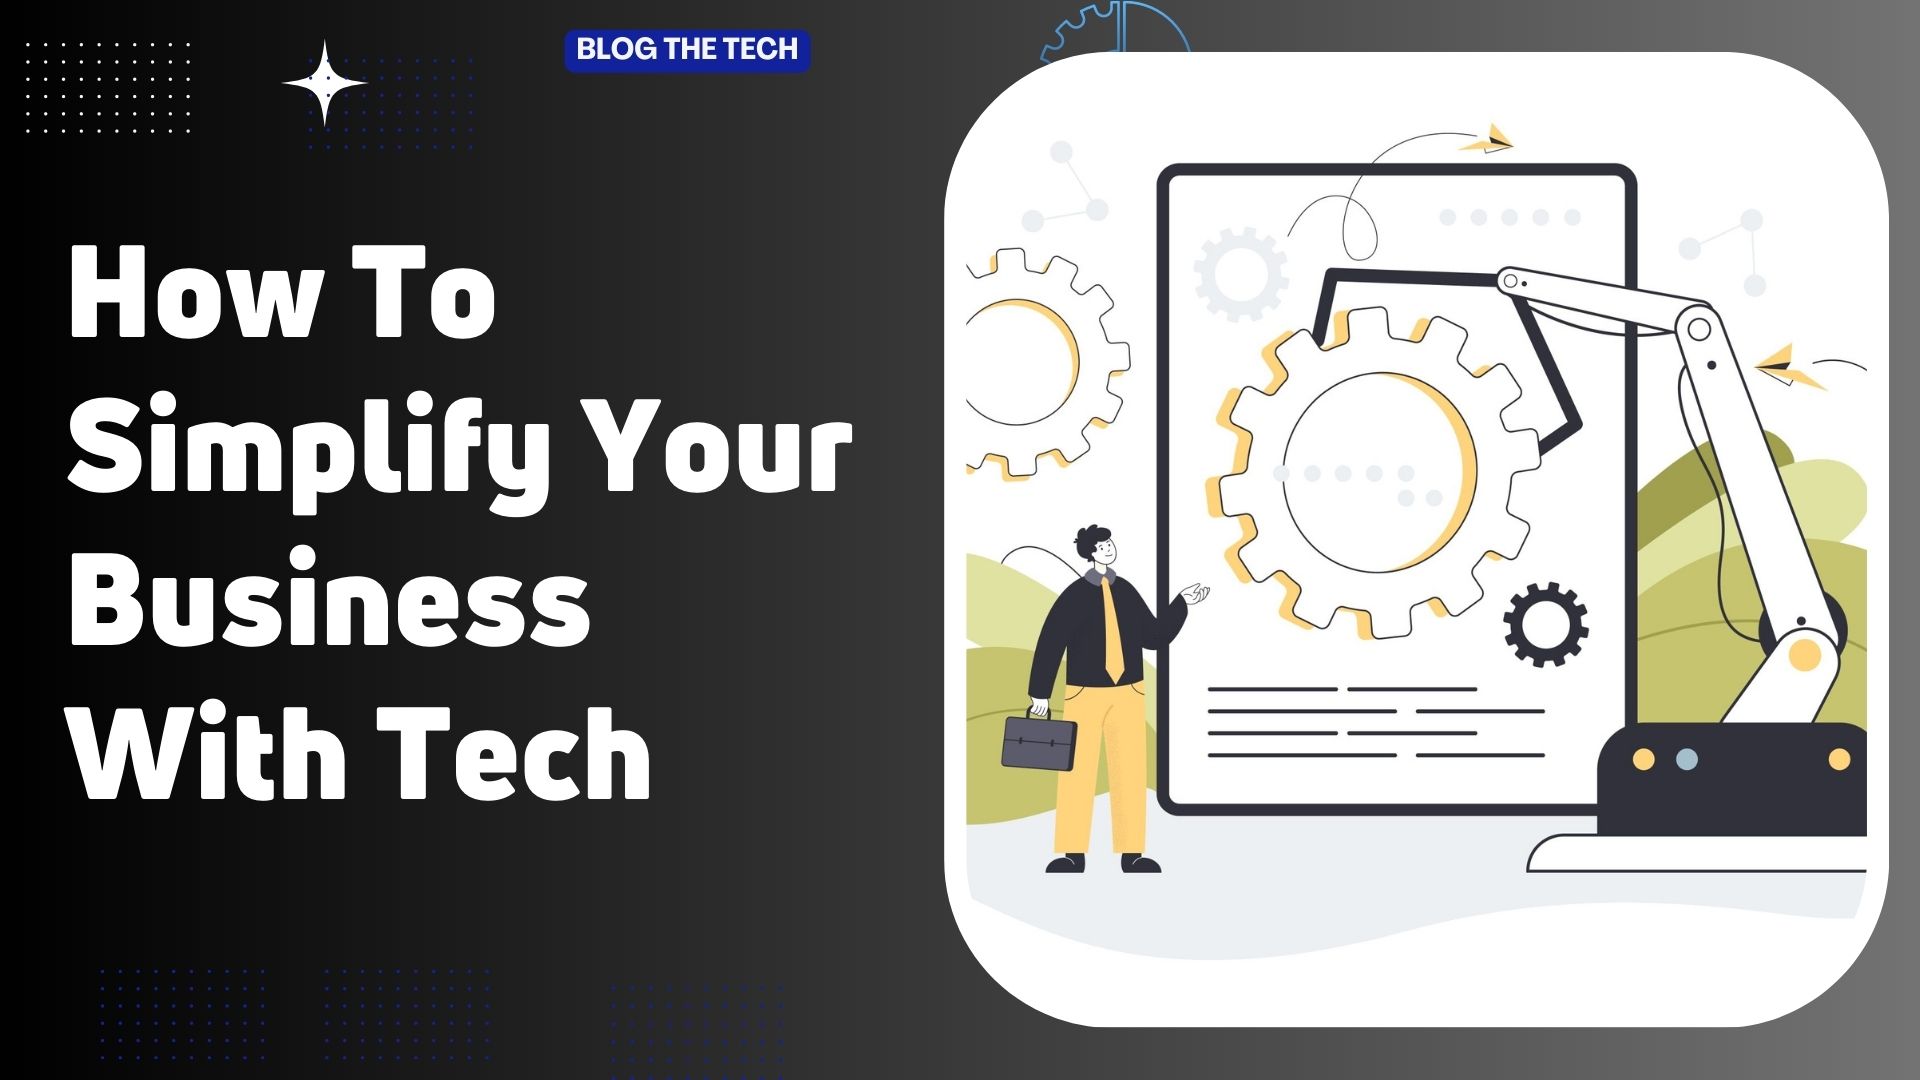 How To Simplify Your Business With Tech